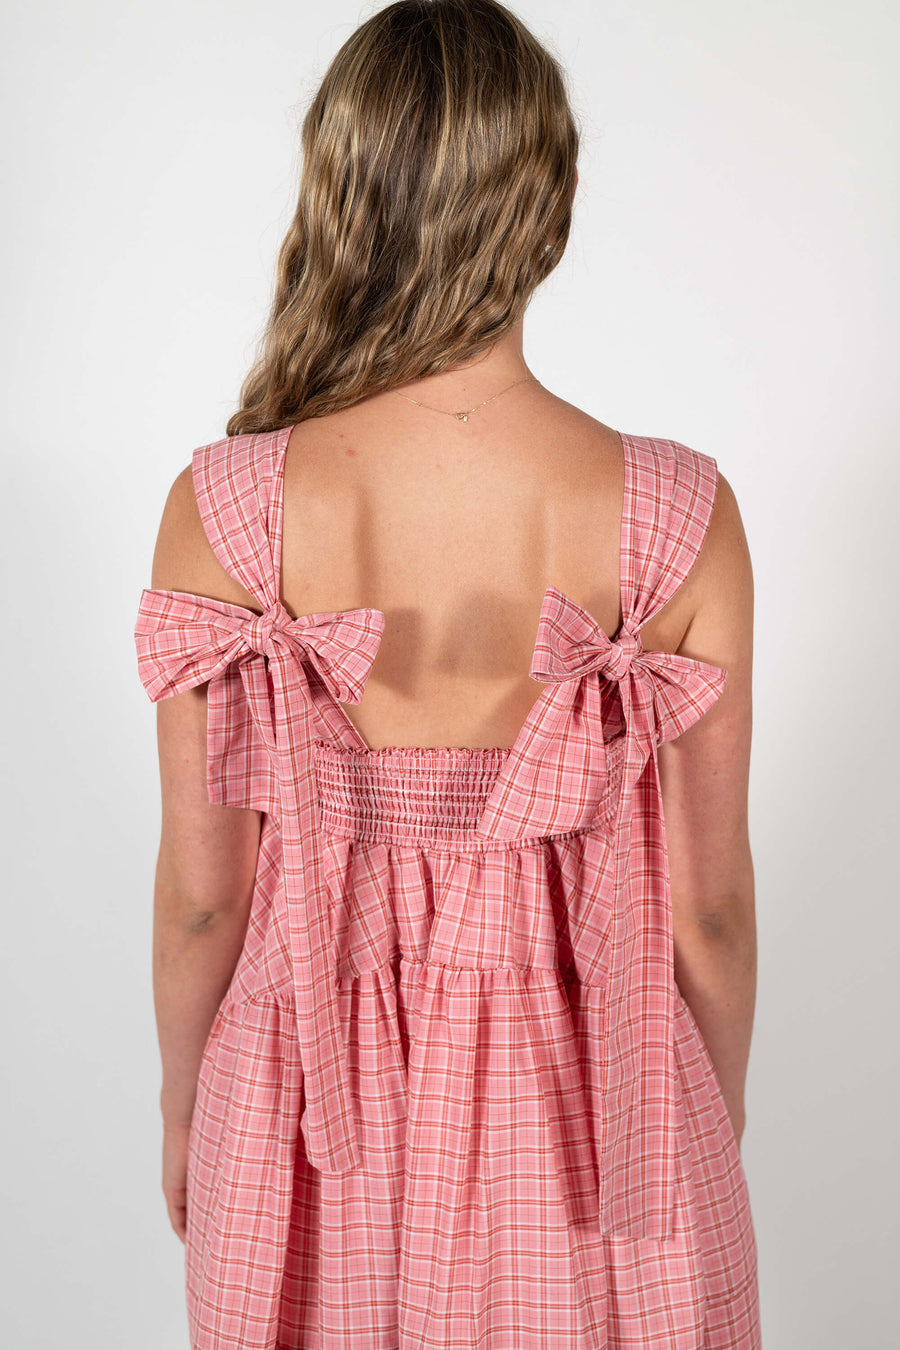 Back bow details of the Mirabel Dress in rose pink plaid. by House of Campbell